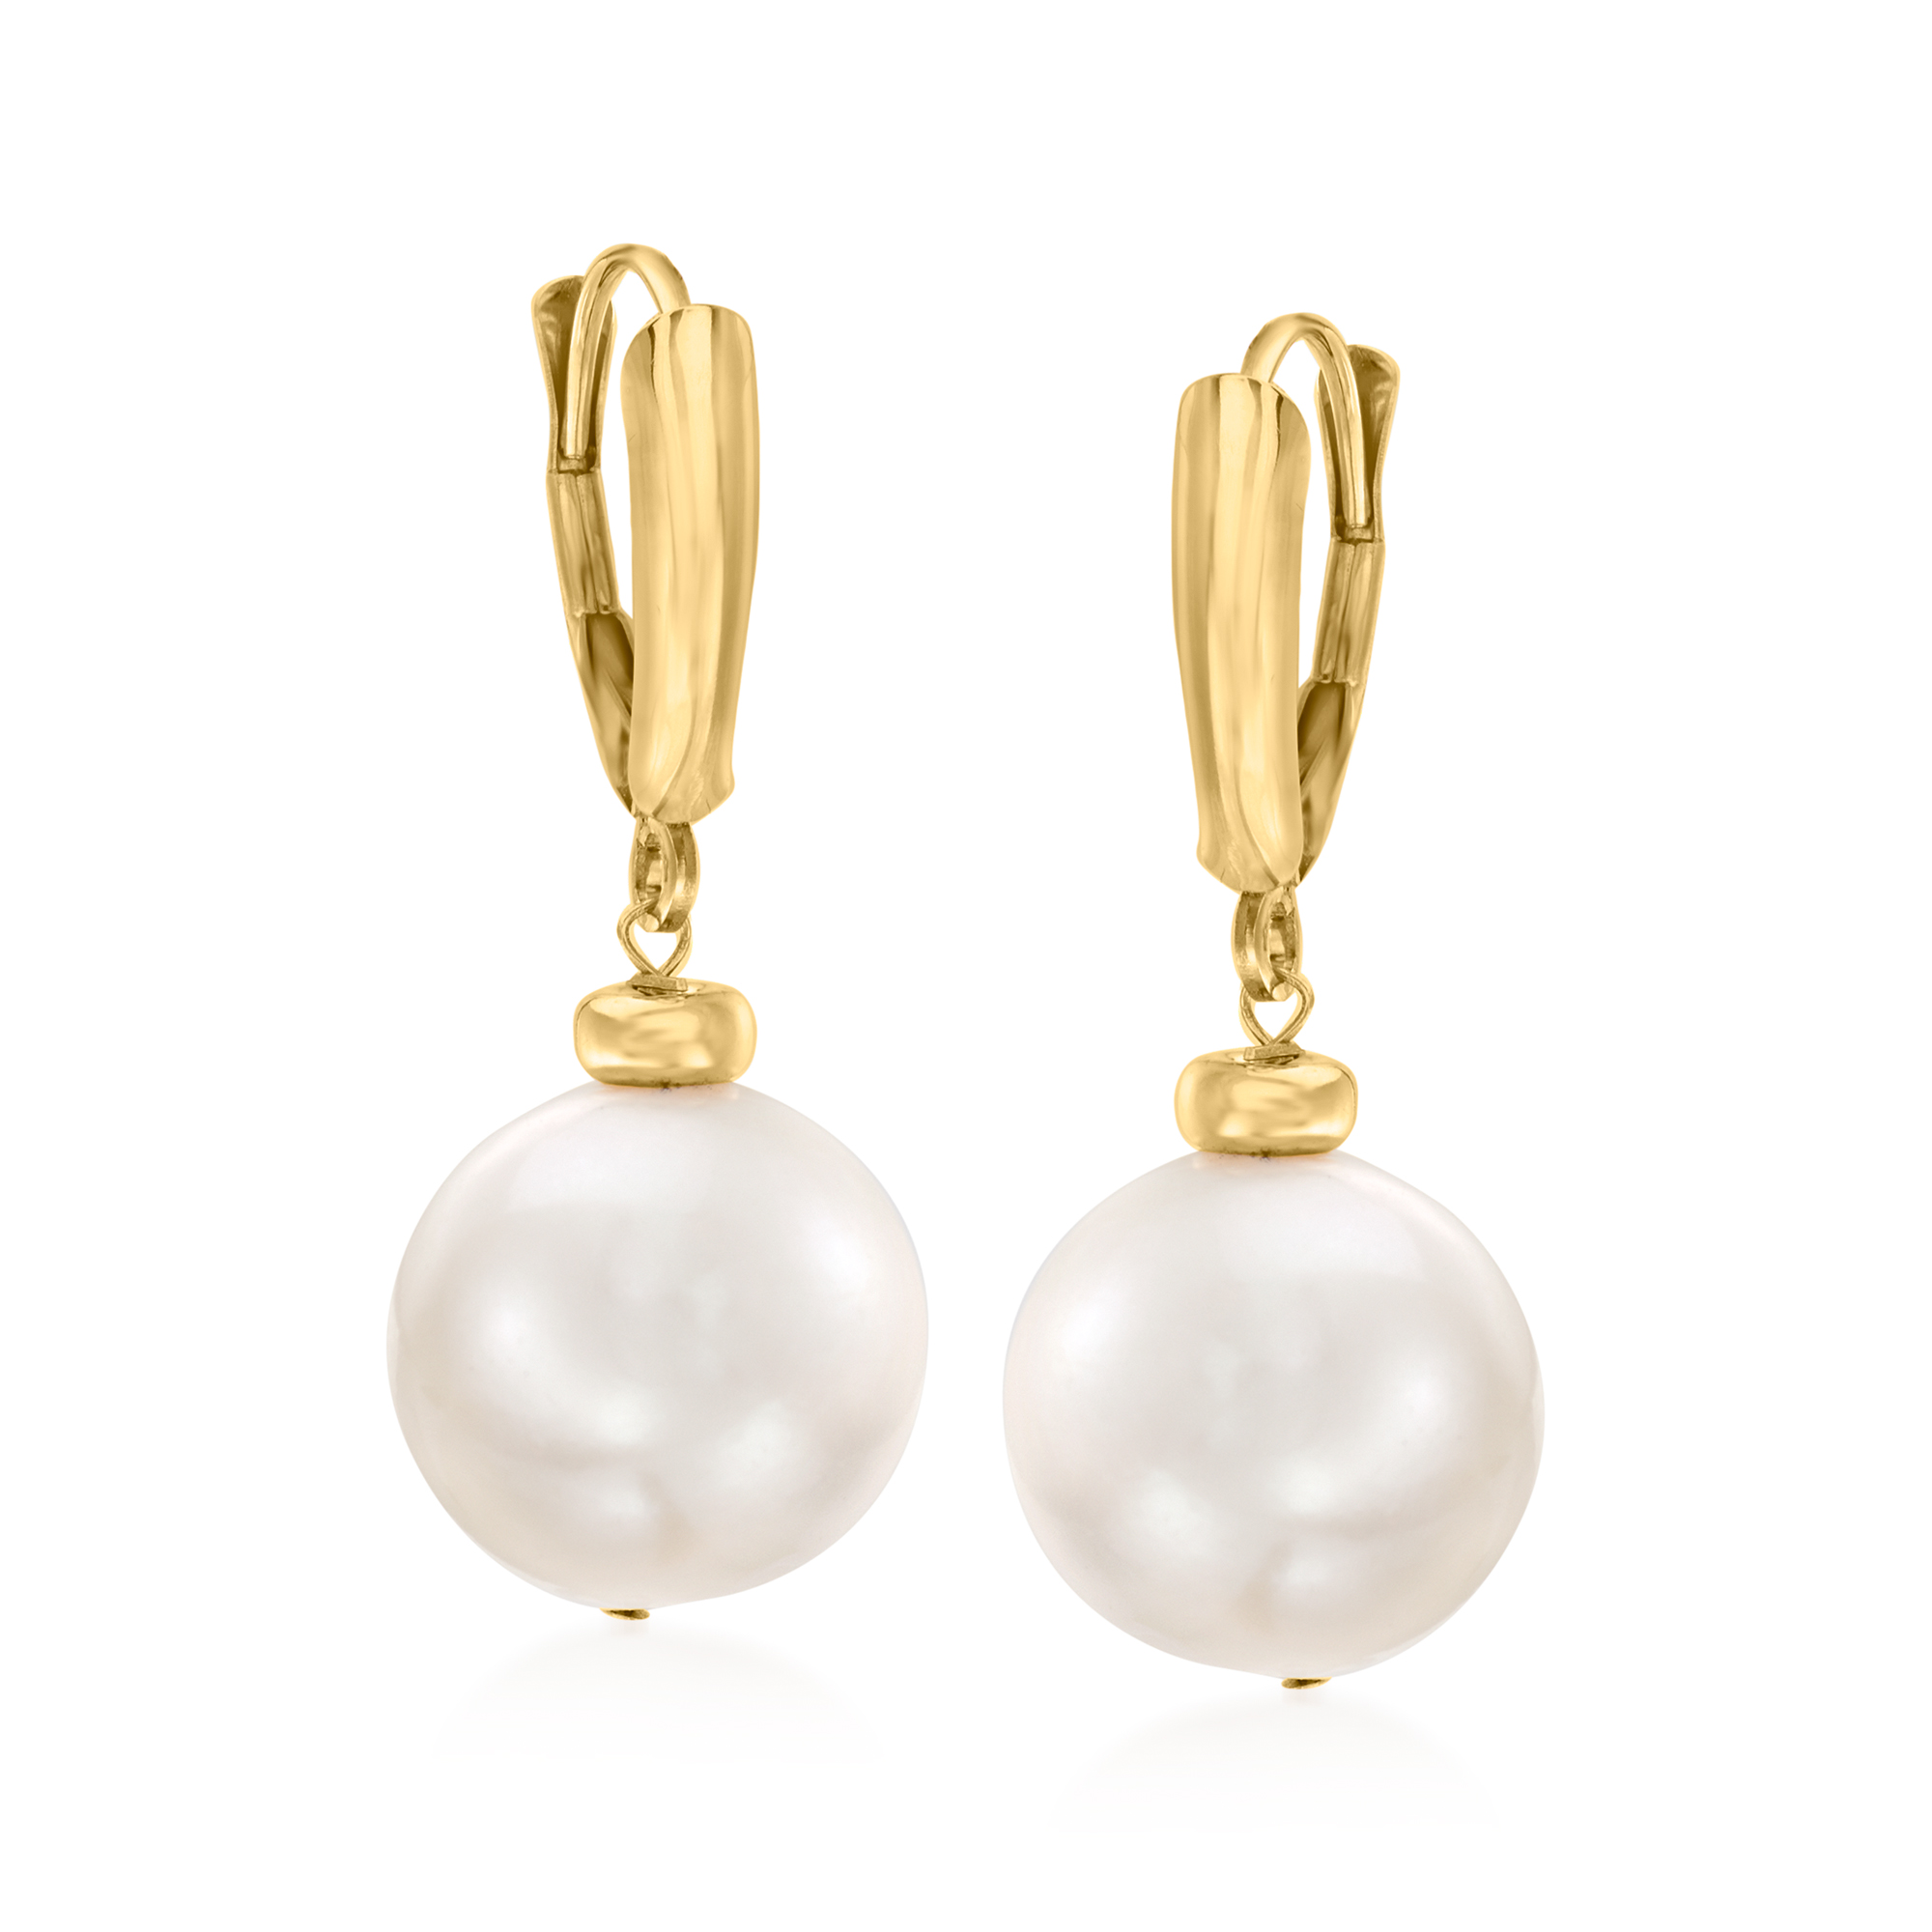 11.5-12.5mm Cultured Pearl Drop Earrings in 14kt Yellow Gold 